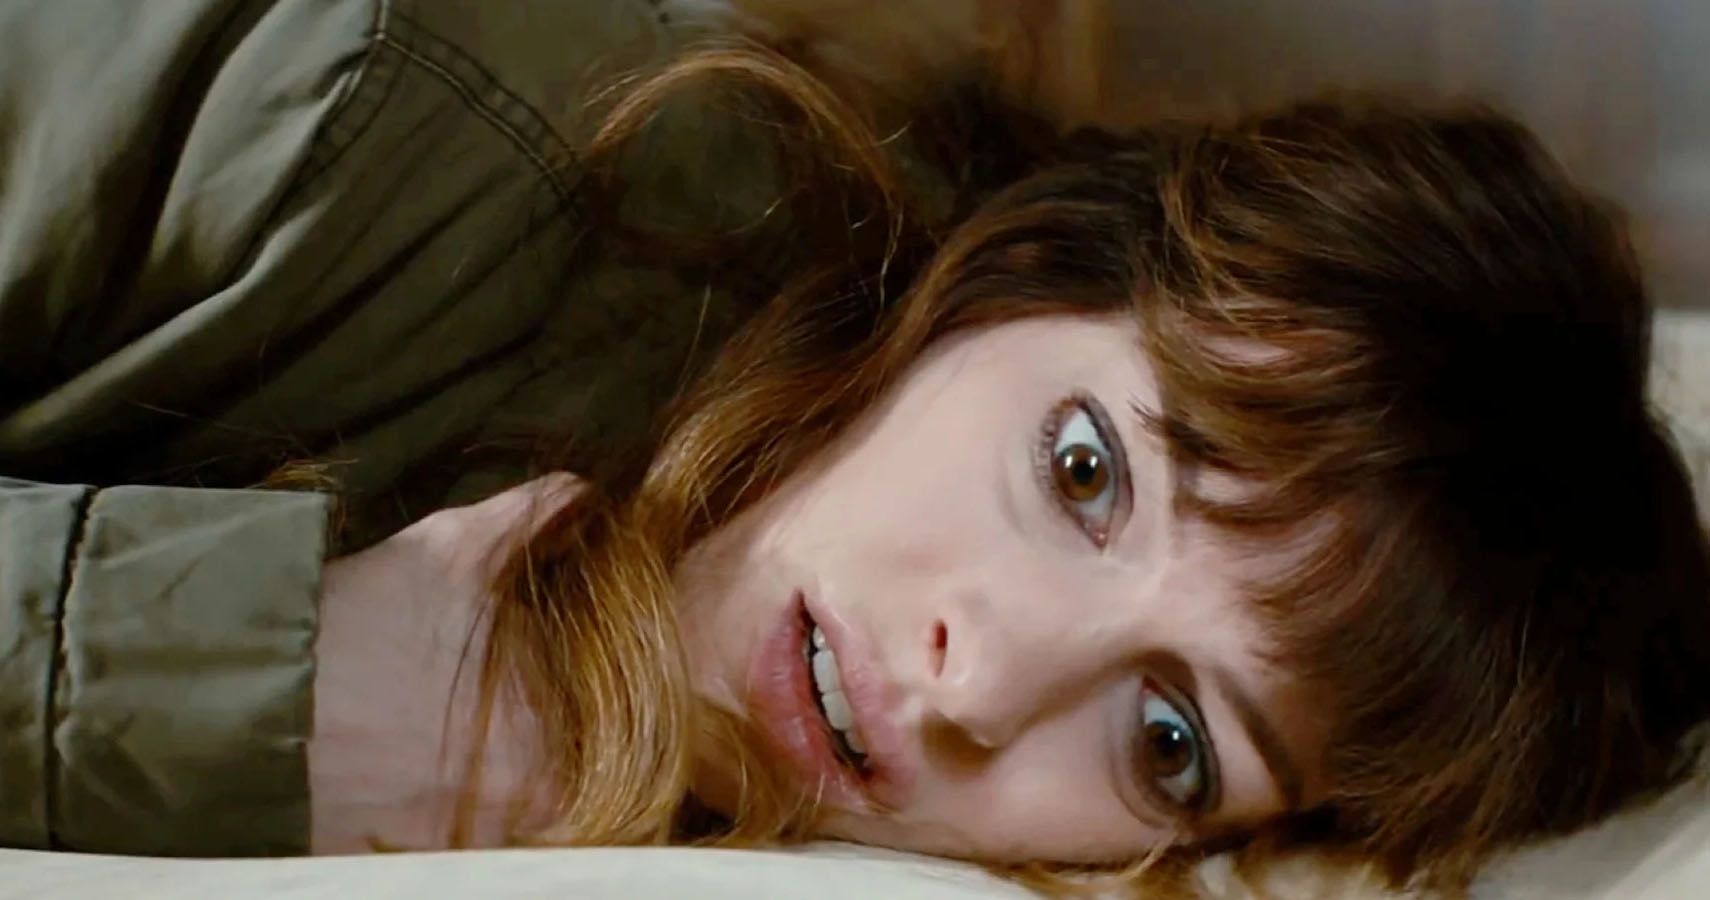 Anne Hathaway's 15 Best Movies, Ranked According To Rotten Tomatoes